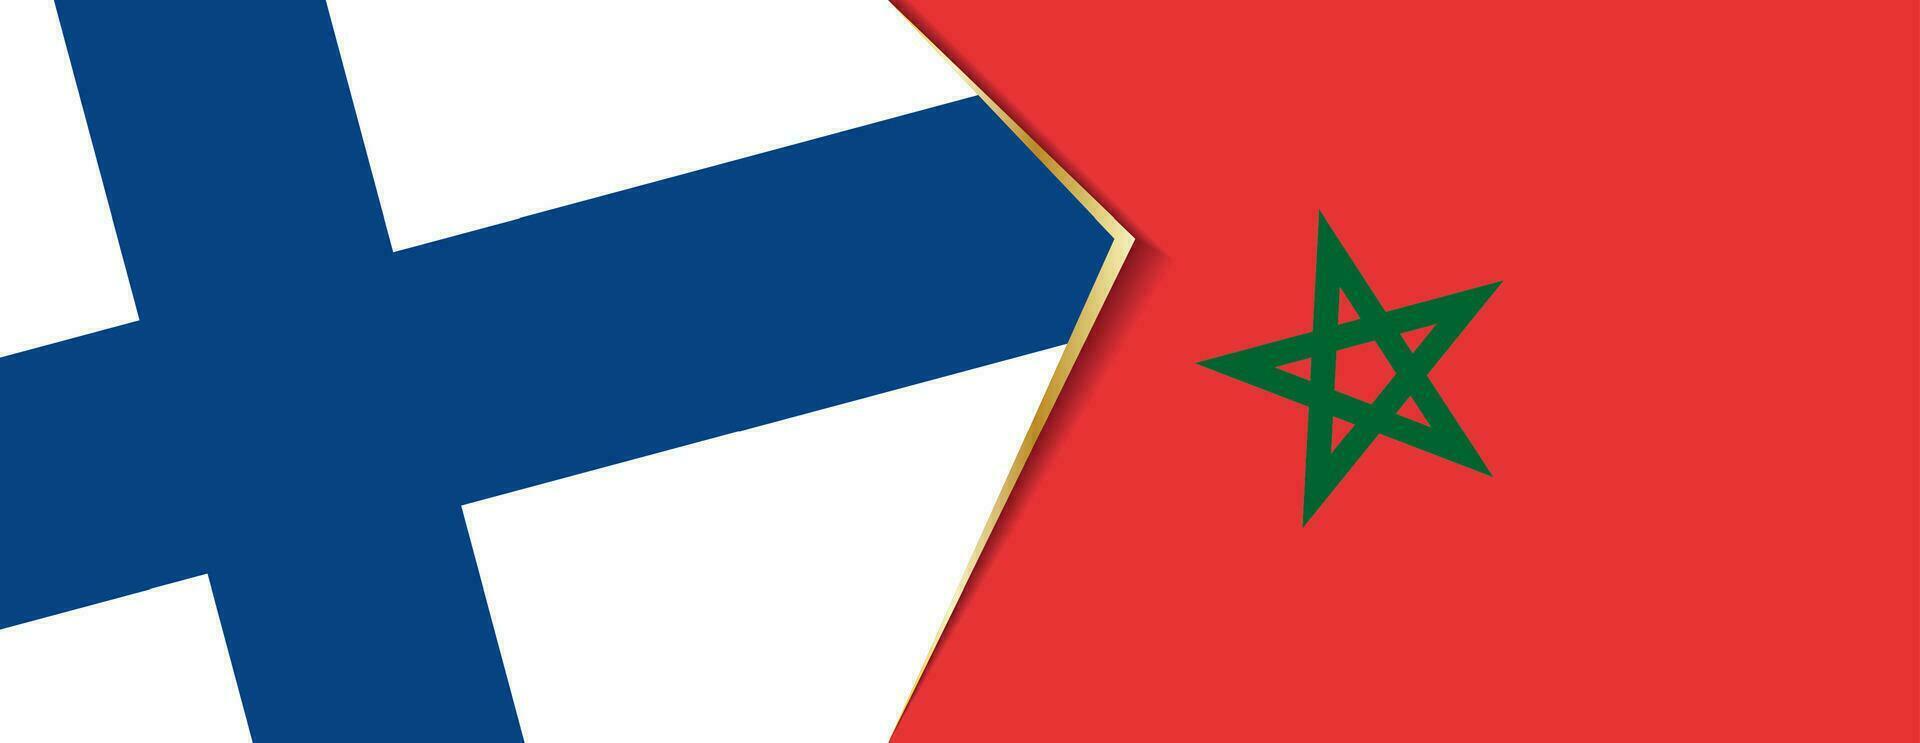 Finland and Morocco flags, two vector flags.